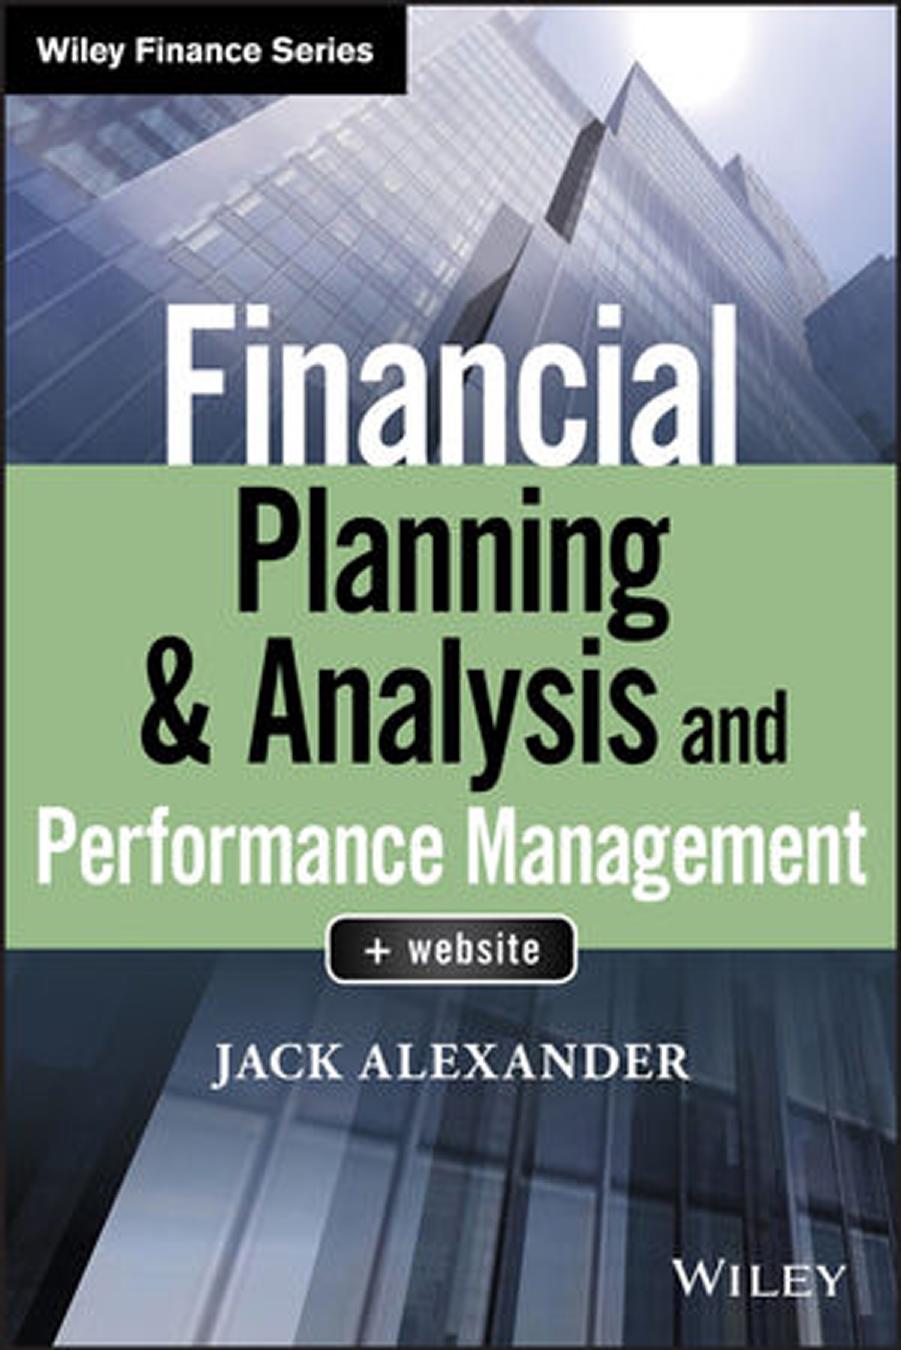 Financial Planning & Analysis and Performance Management 2018.pdf